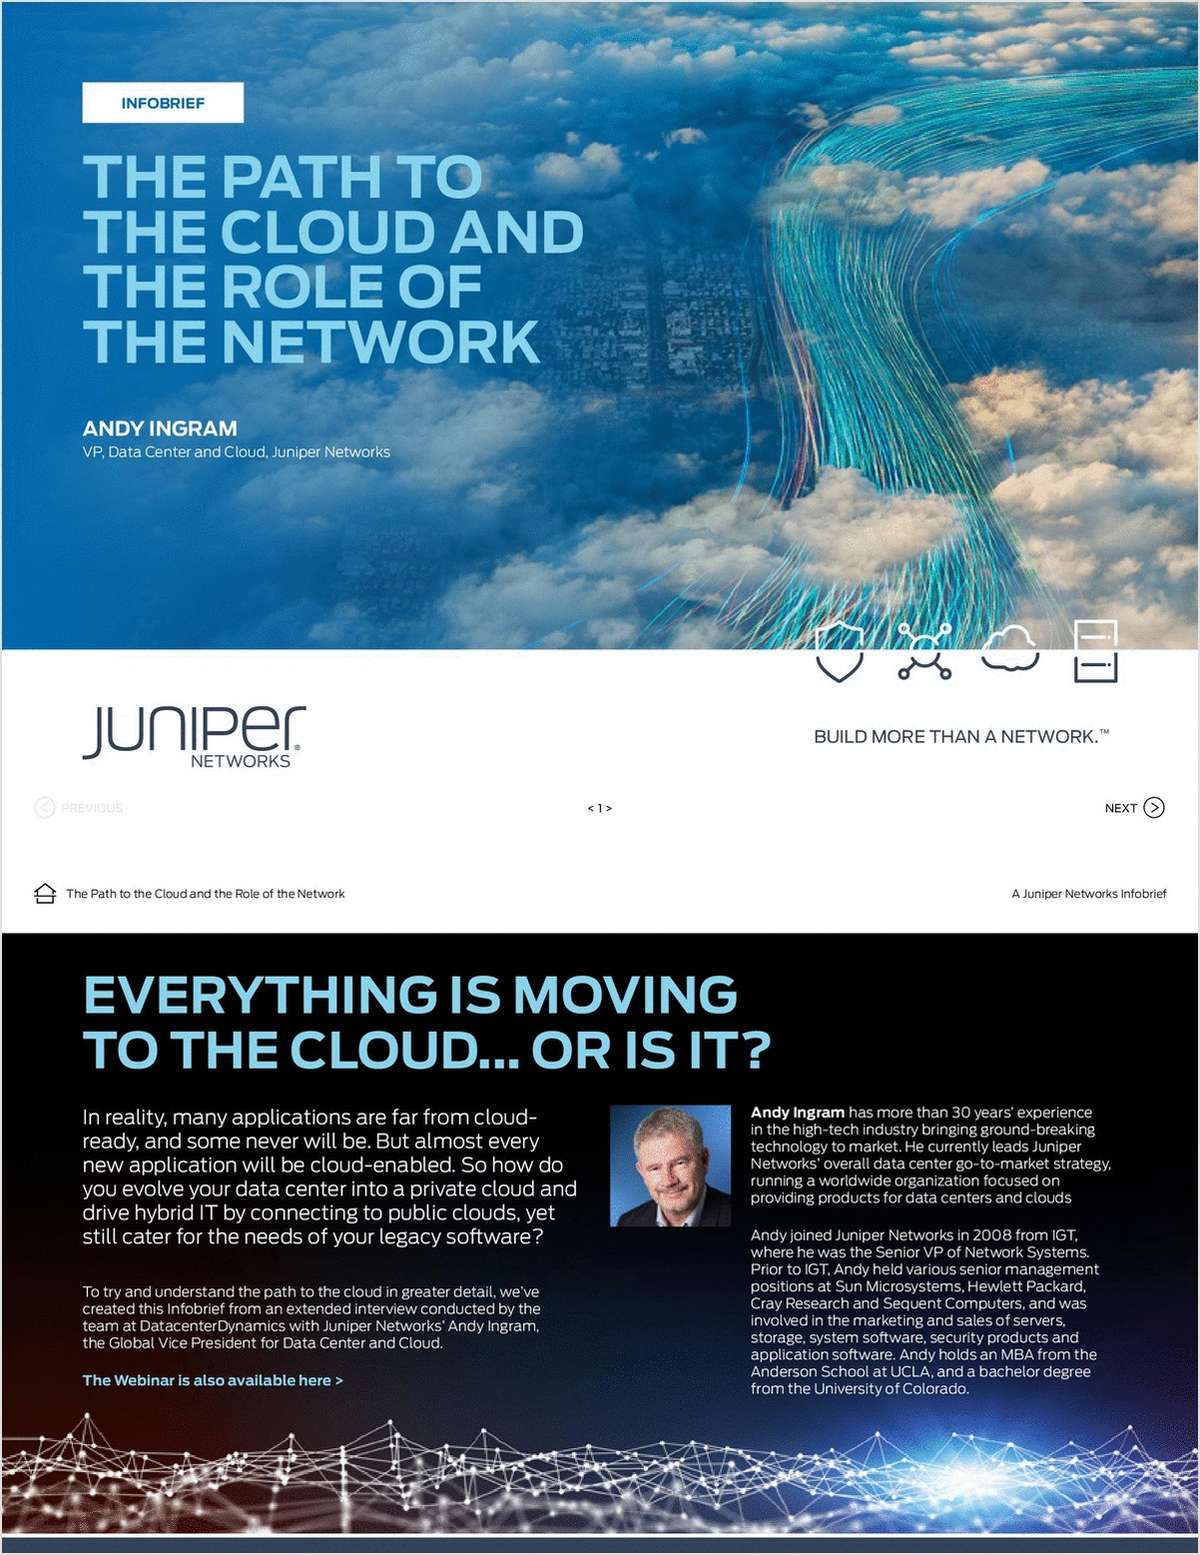 Infobrief: The Path To The Cloud And The Role Of The Network